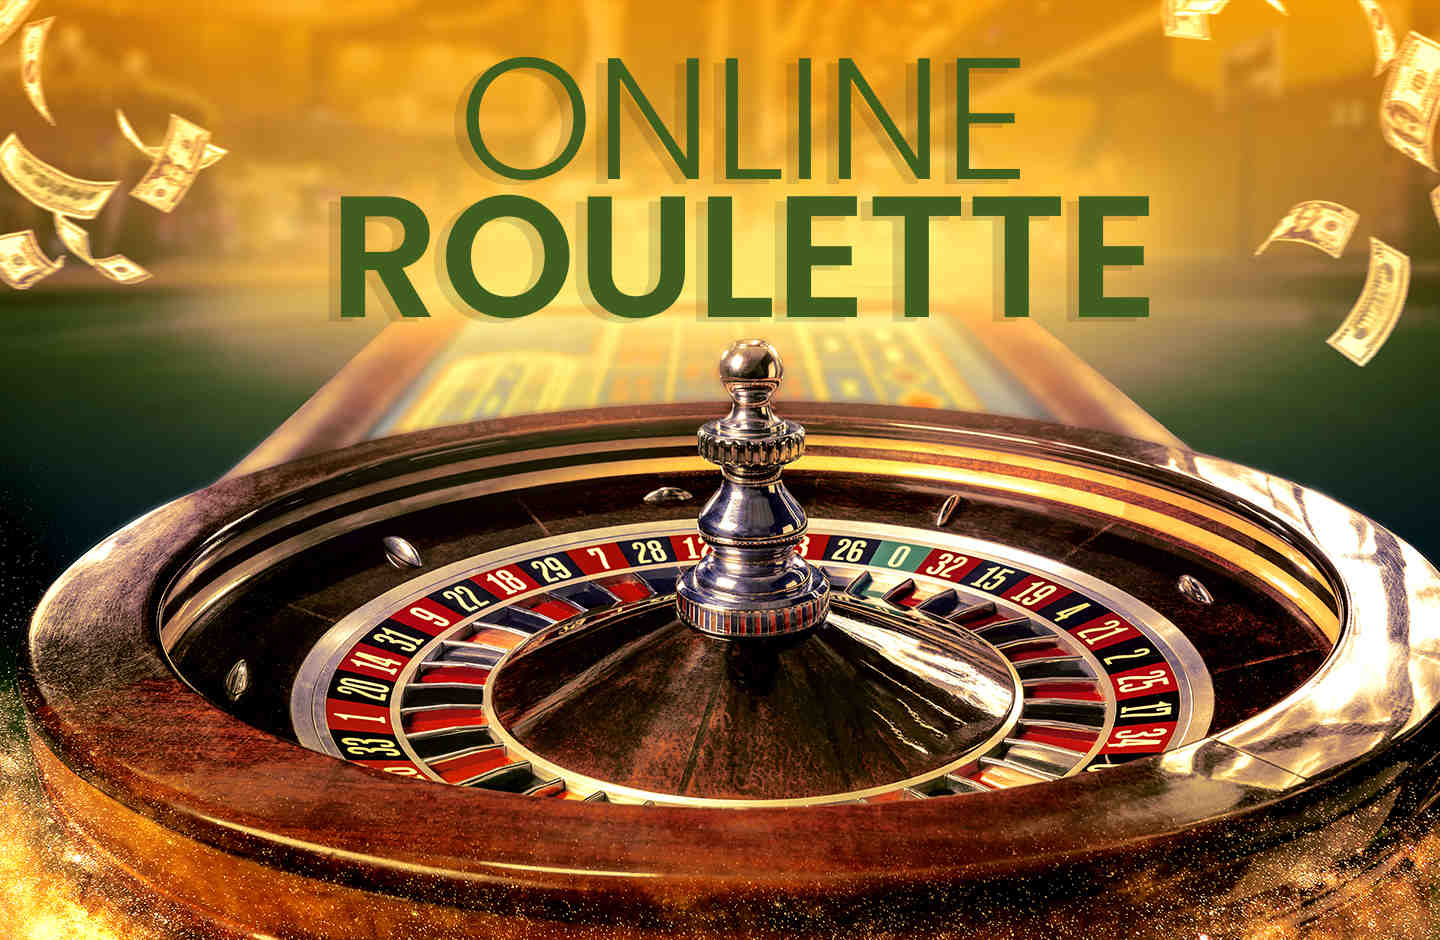 How To Take The Headache Out Of Evolution of Online Gambling in Turkey: Historical Perspective